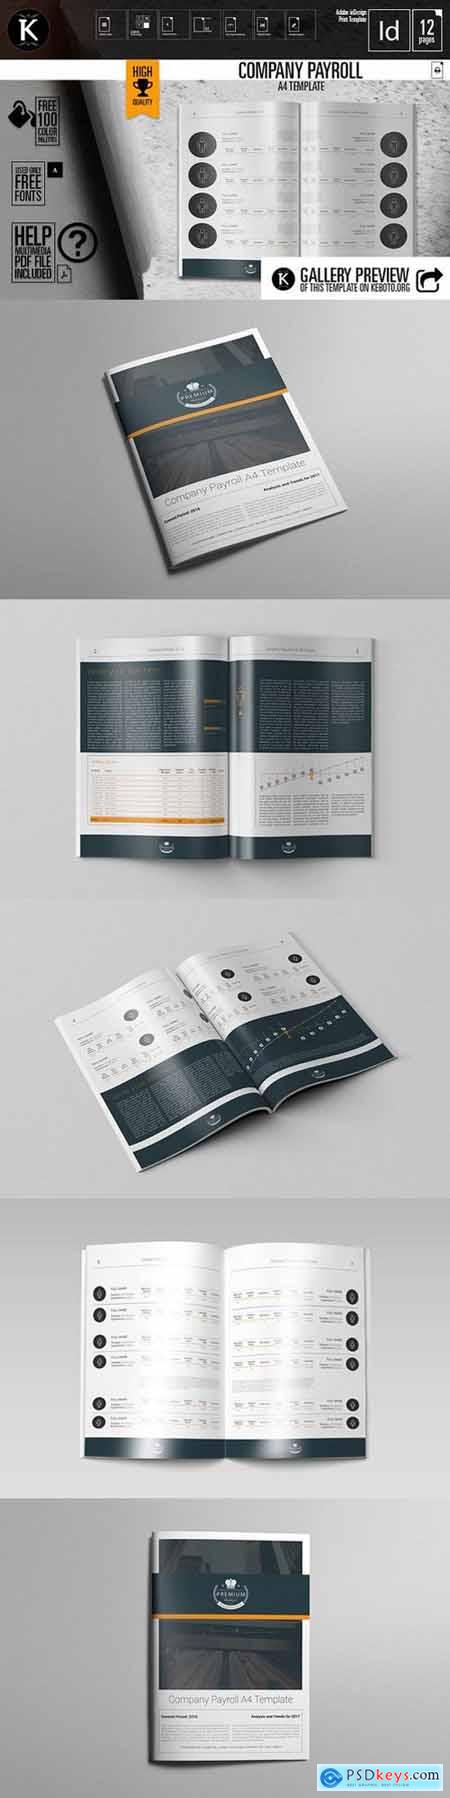 company-payroll-a4-template-free-download-photoshop-vector-stock